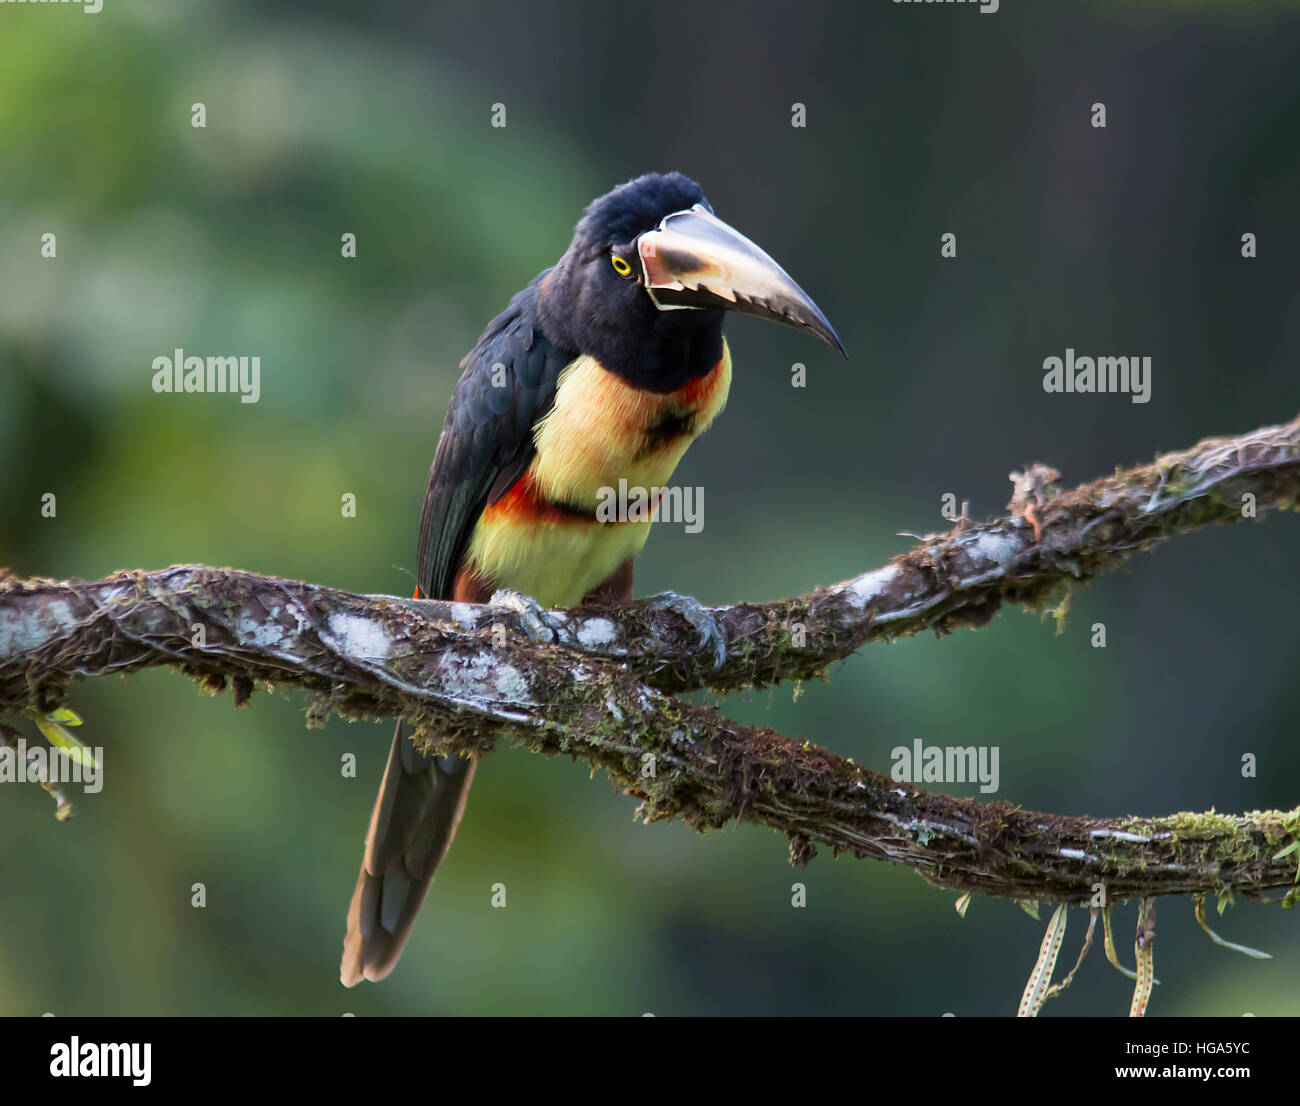 Collared Aracari perched on a branch Stock Photo